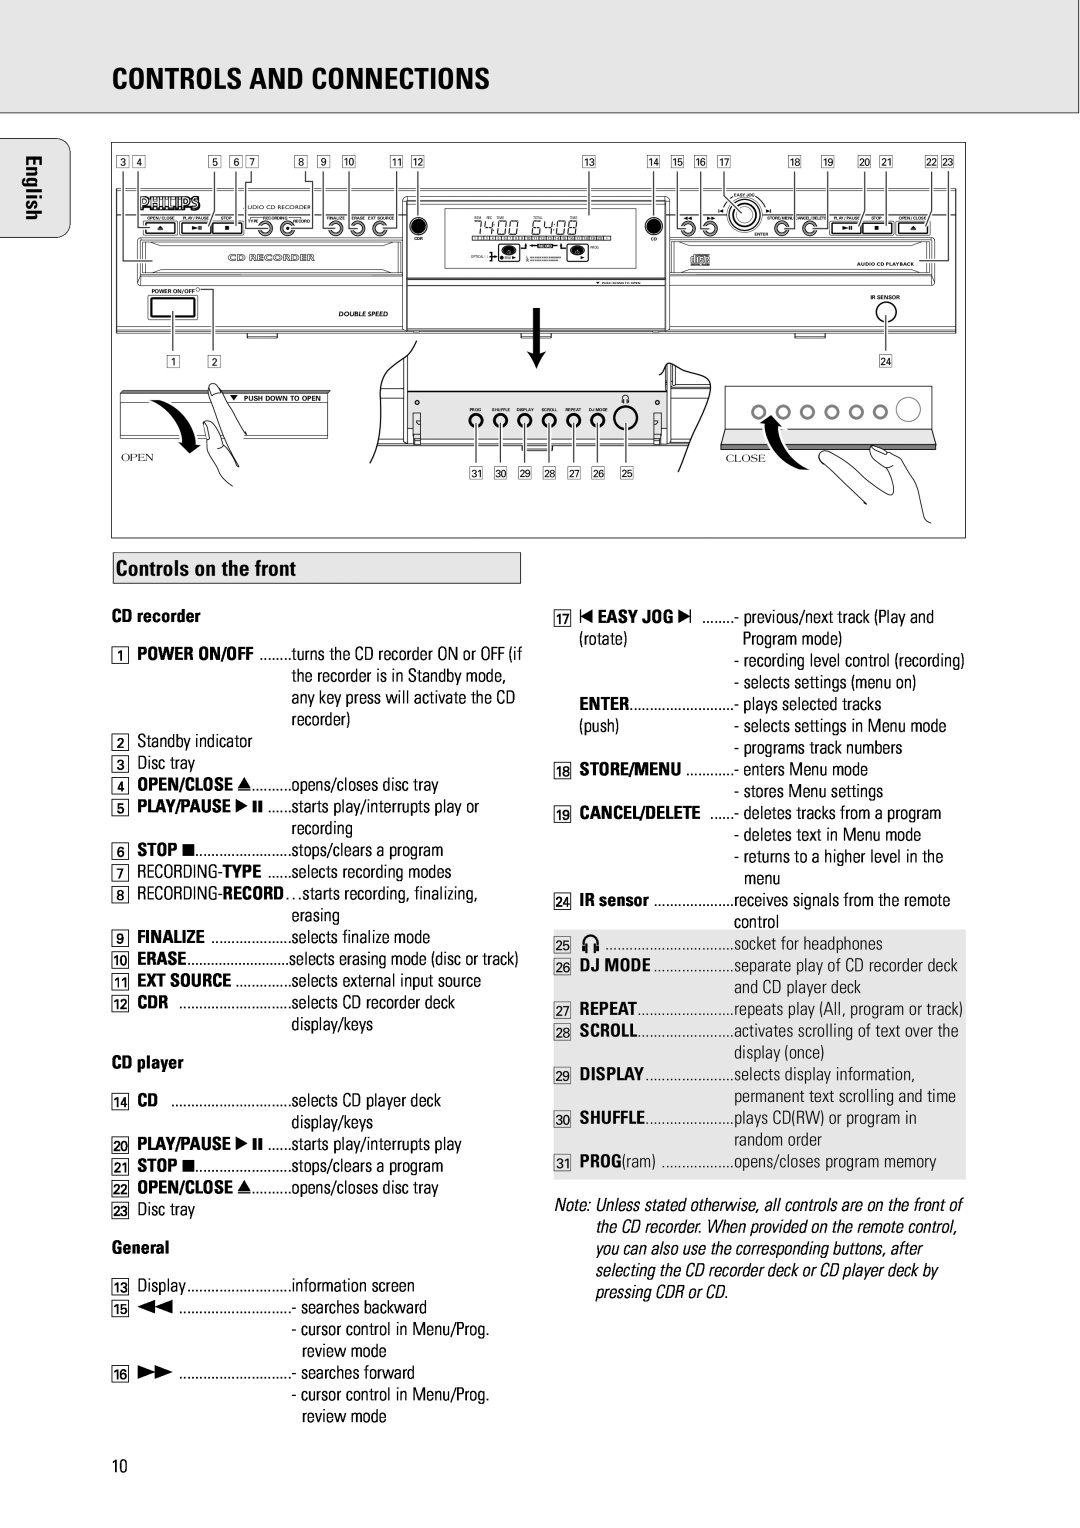 Philips CDR 600/17 Controls And Connections, English, Controls on the front, CD recorder, CD player, General, Store/Menu 